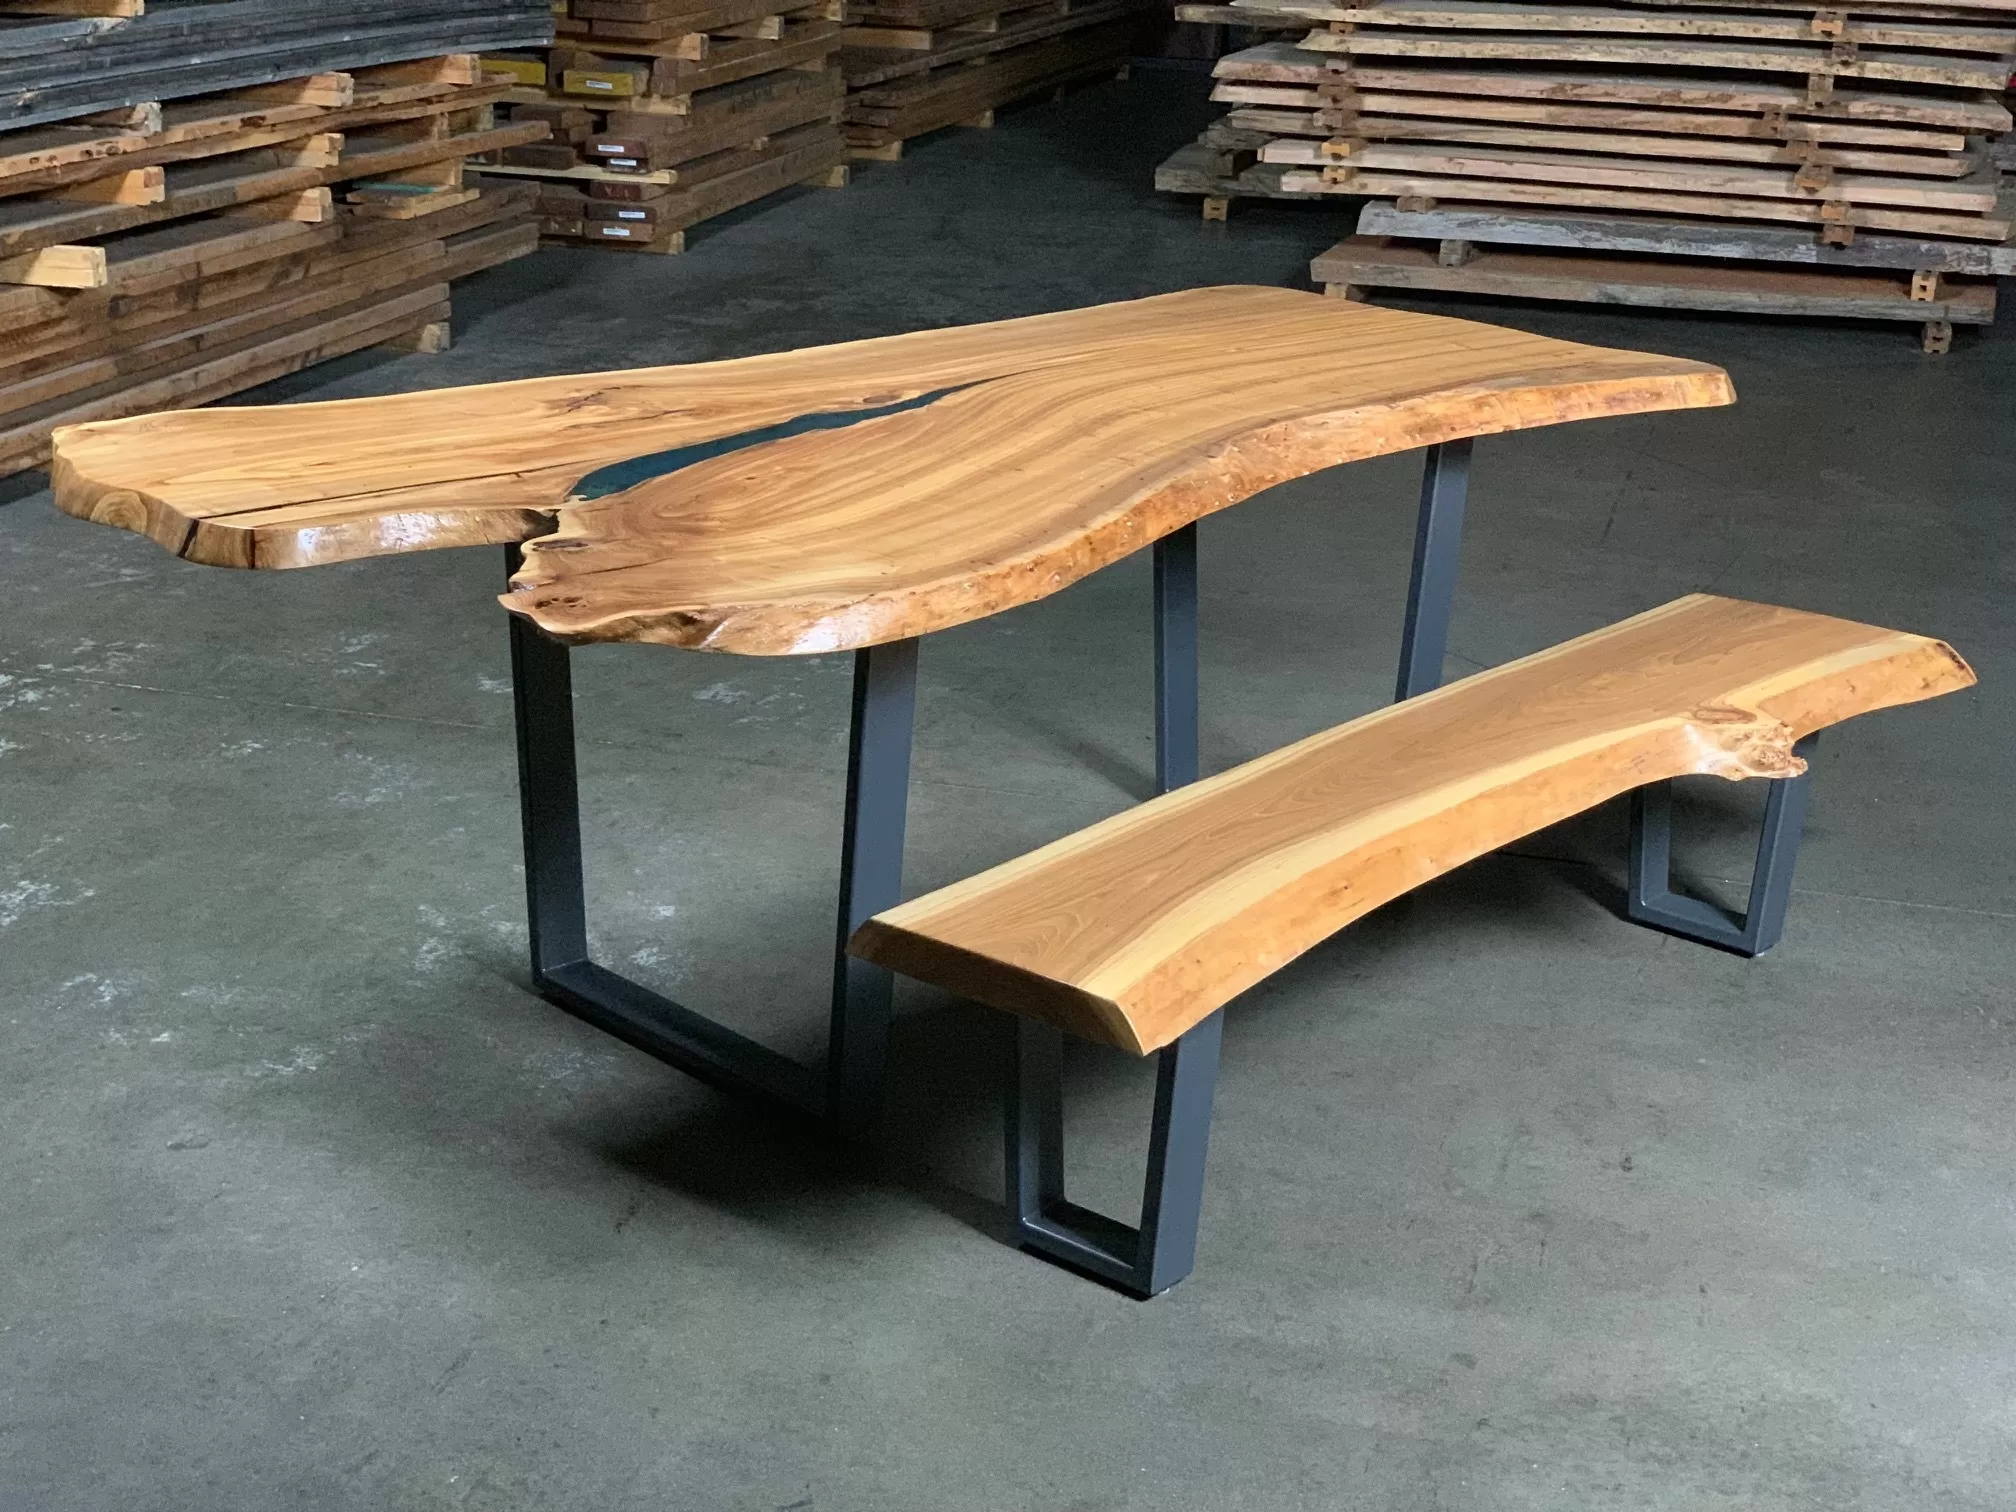 Live Edge Table & Bench